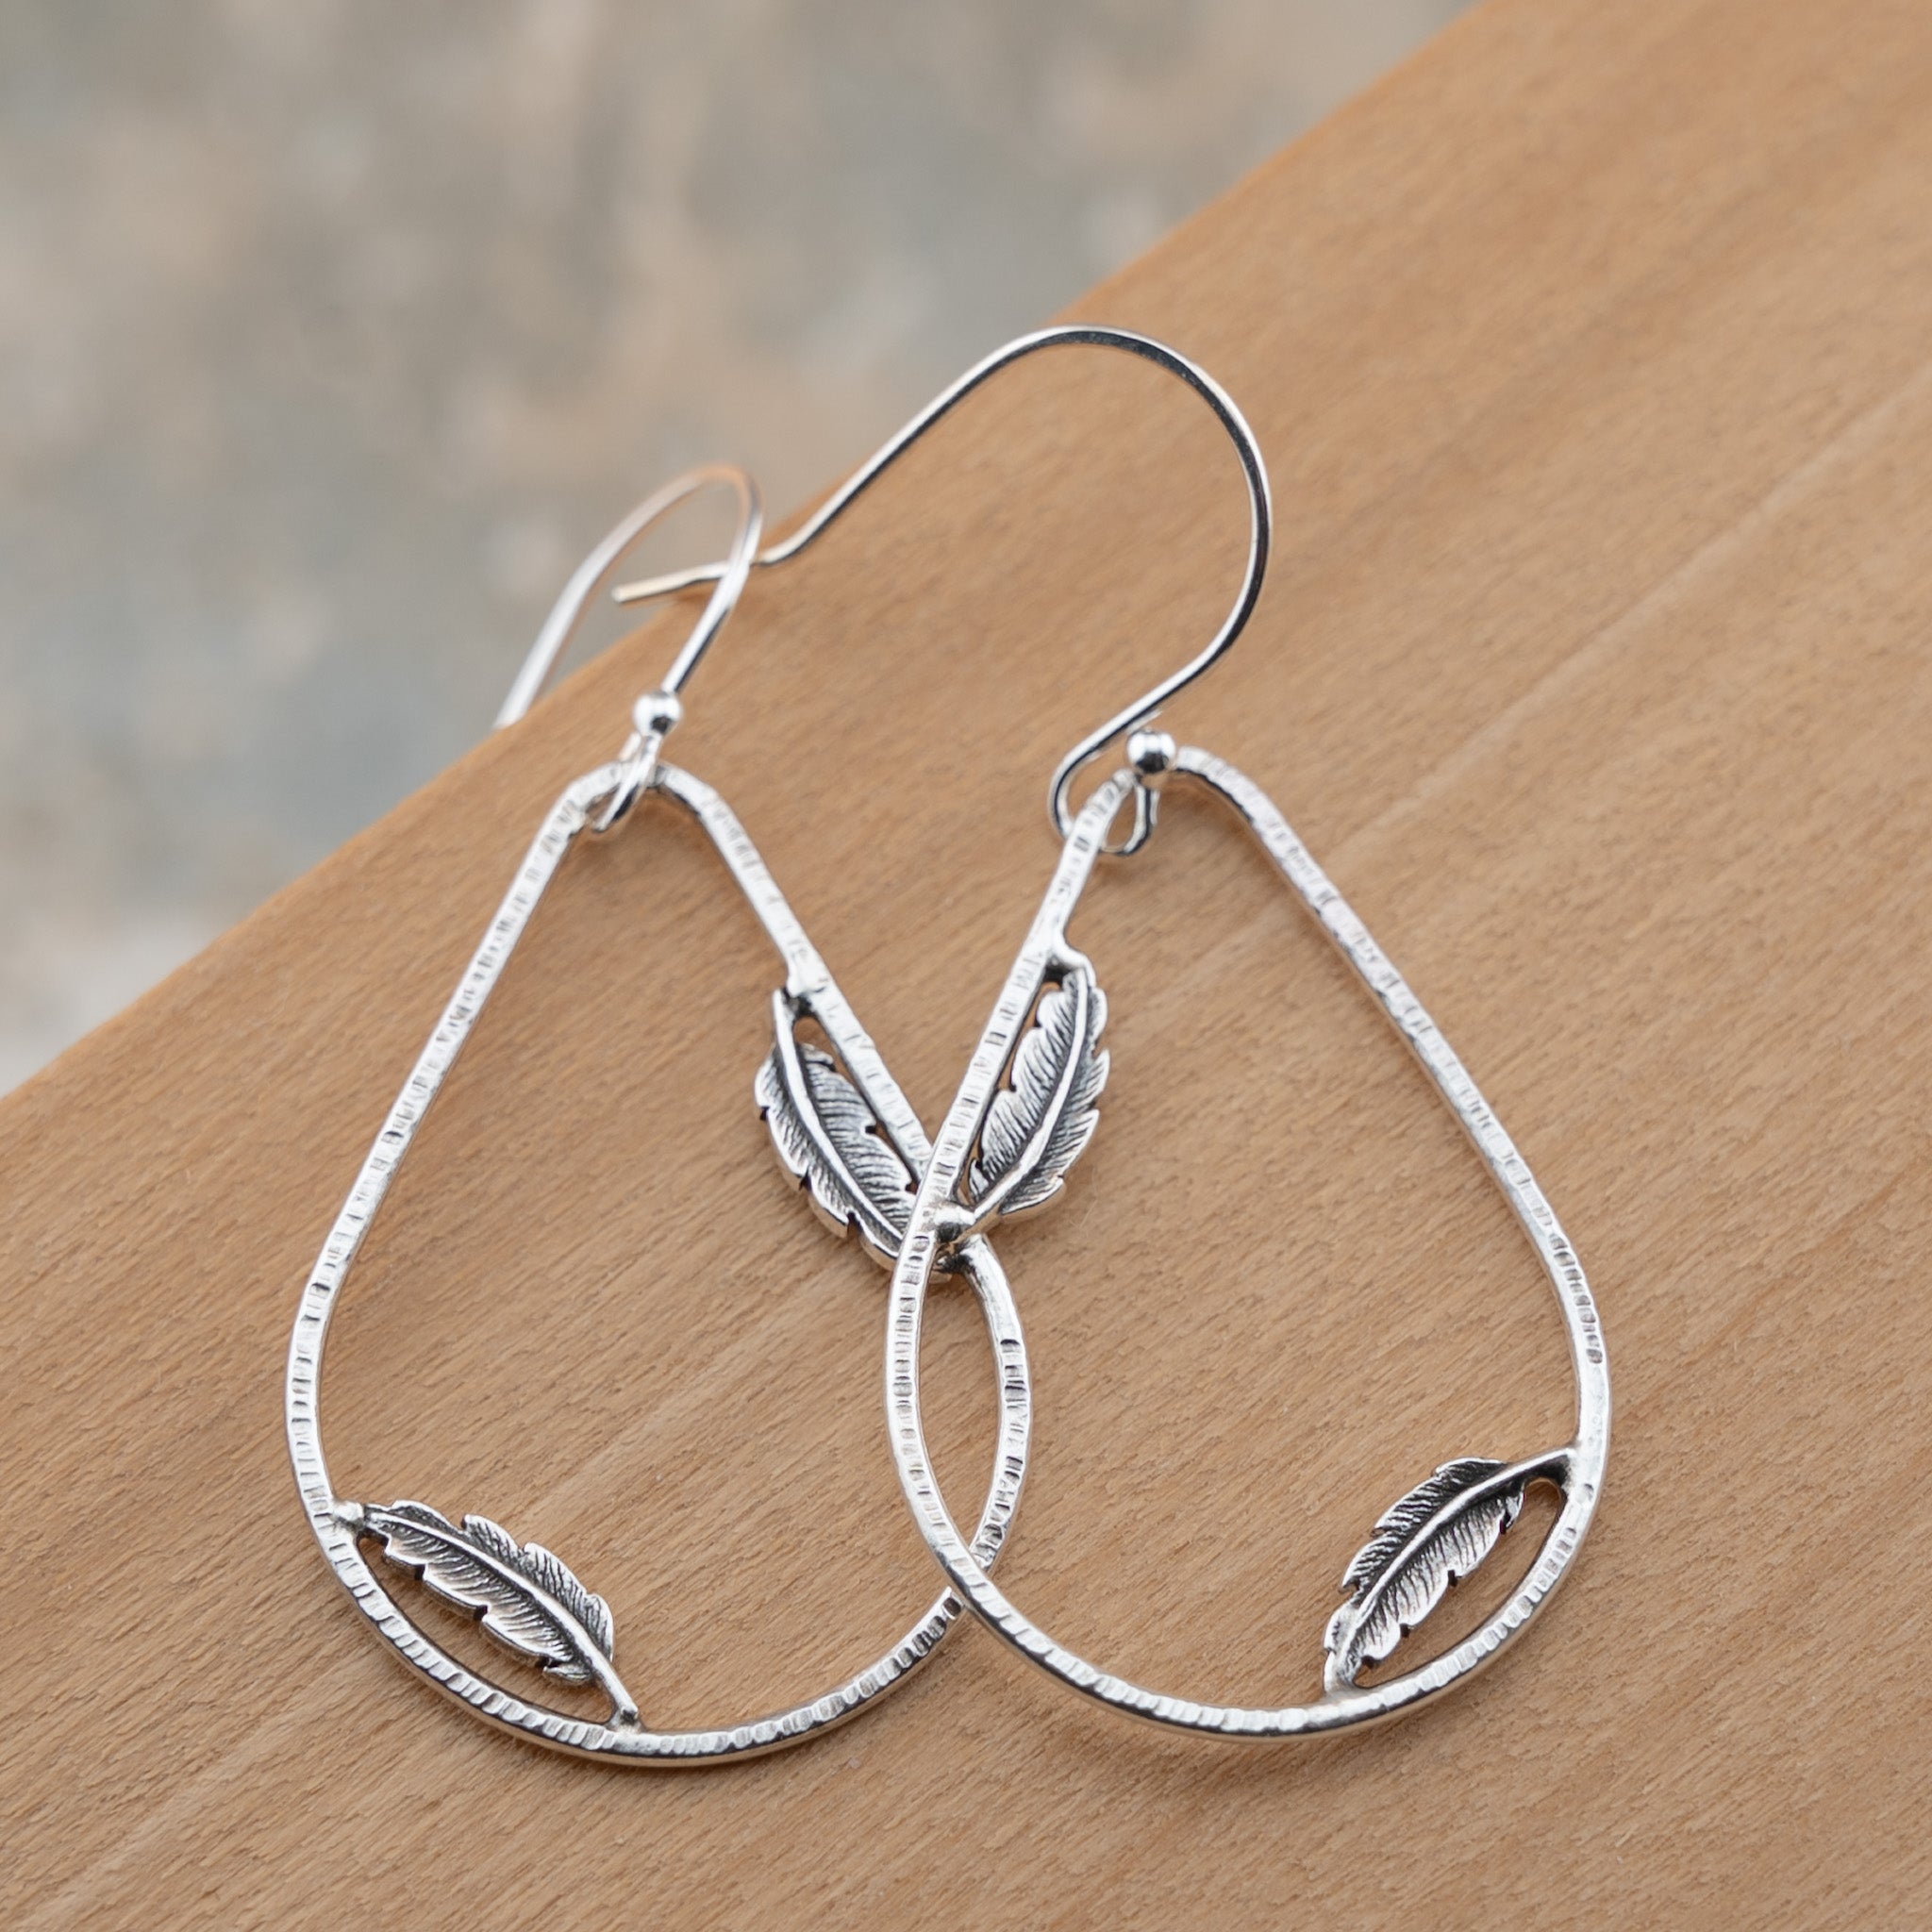 Sterling silver teardrop hoop earrings with dainty feather accents